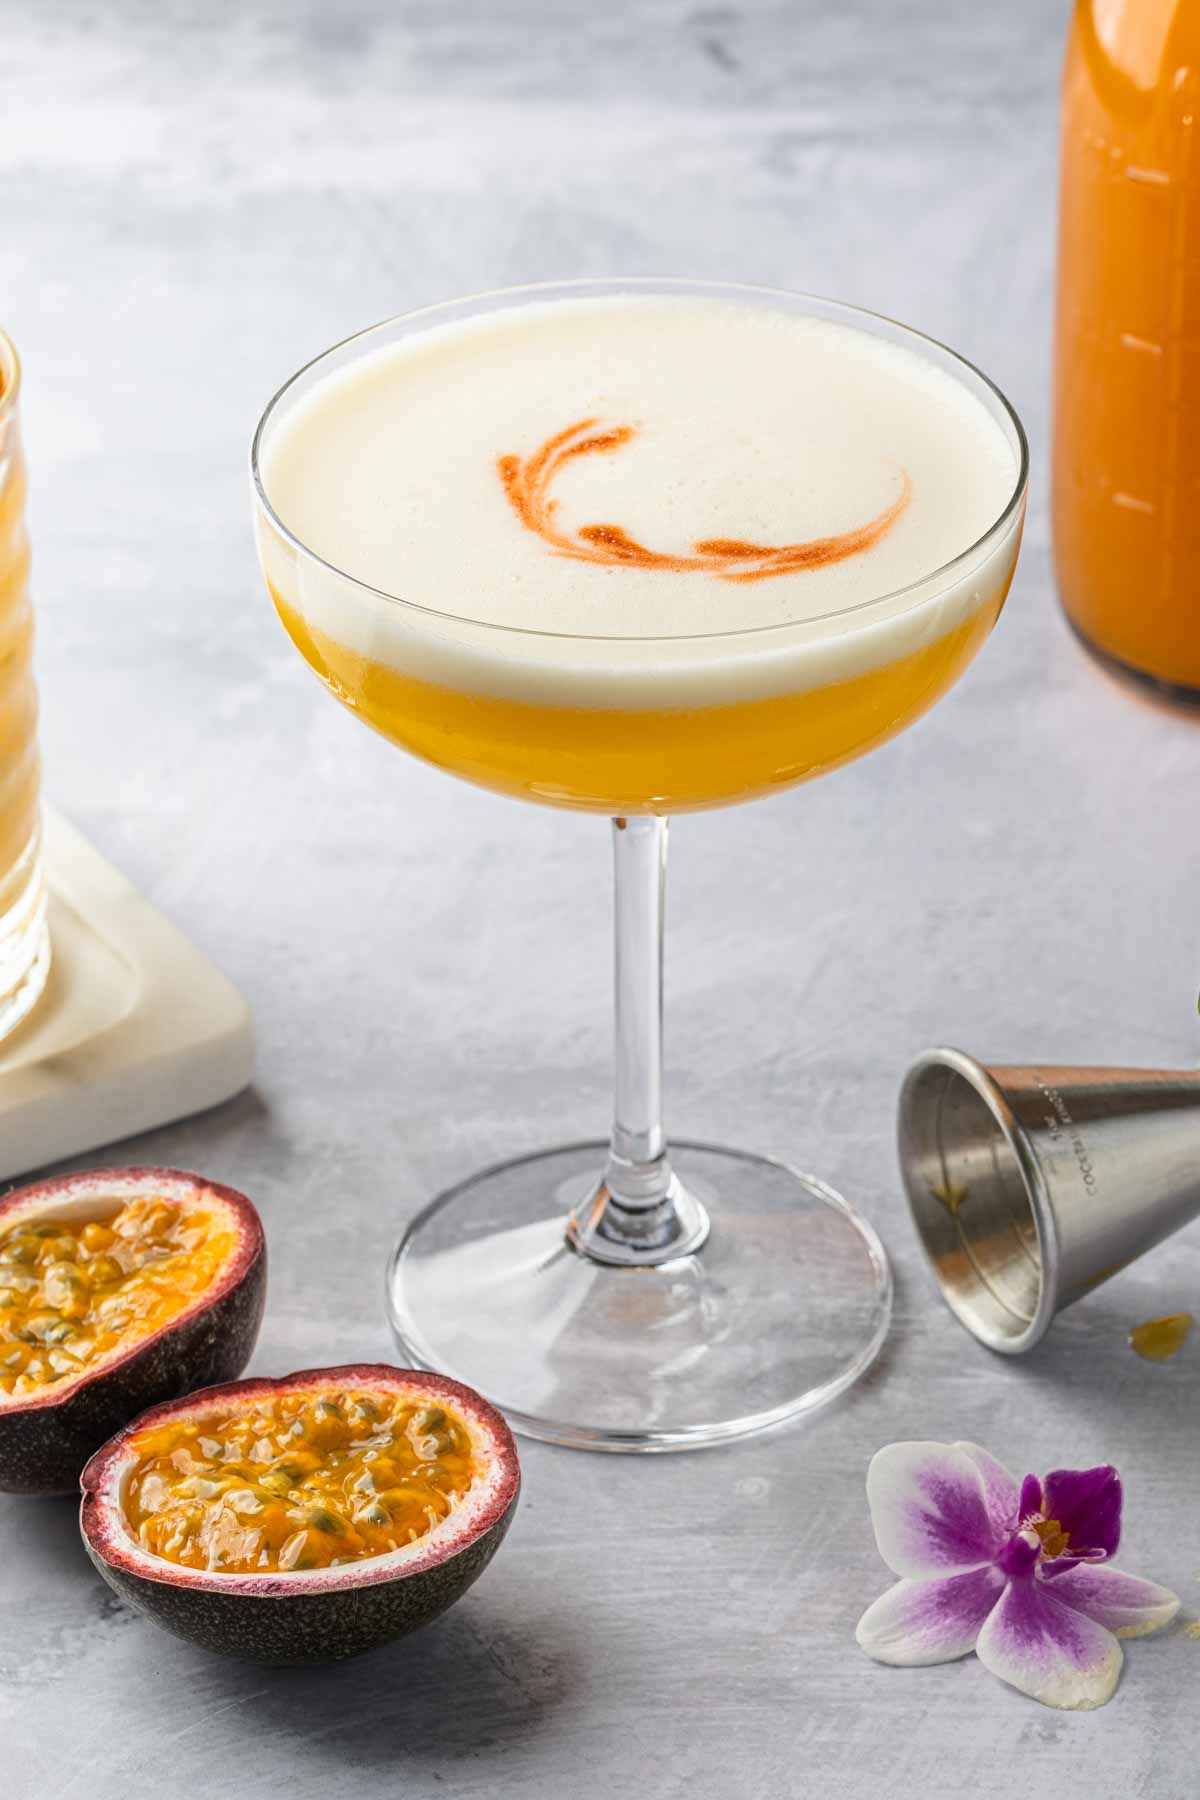 A pisco sour made with passion fruit syrup, garnished with a swirl in the foam. 